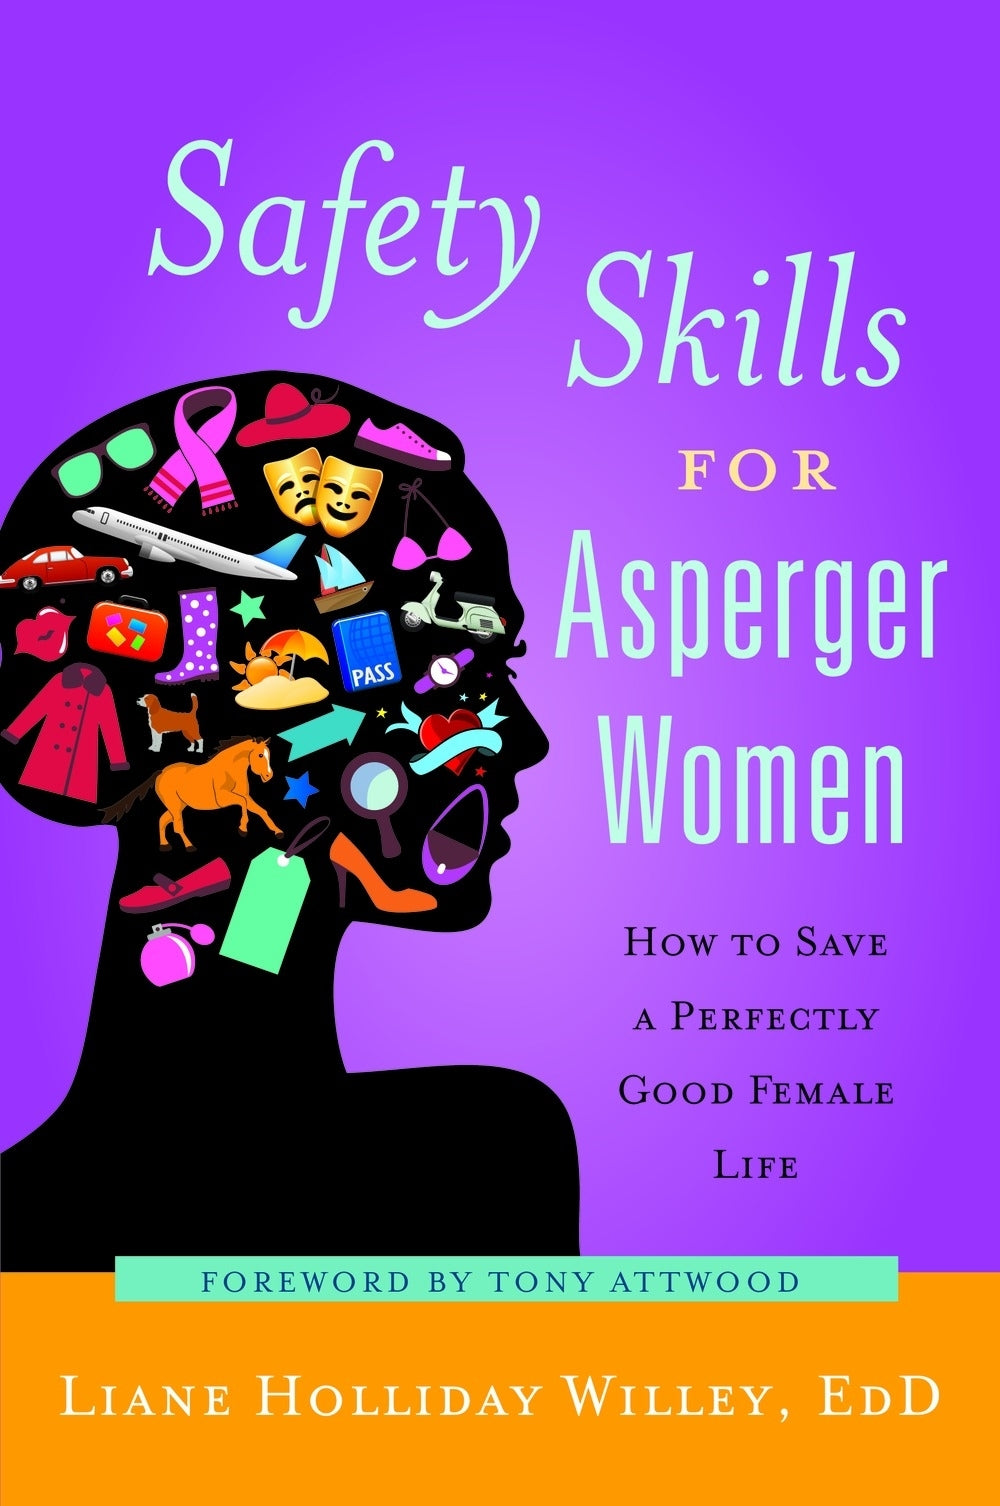 Safety Skills for Asperger Women by Dr Anthony Attwood, Liane Holliday Willey